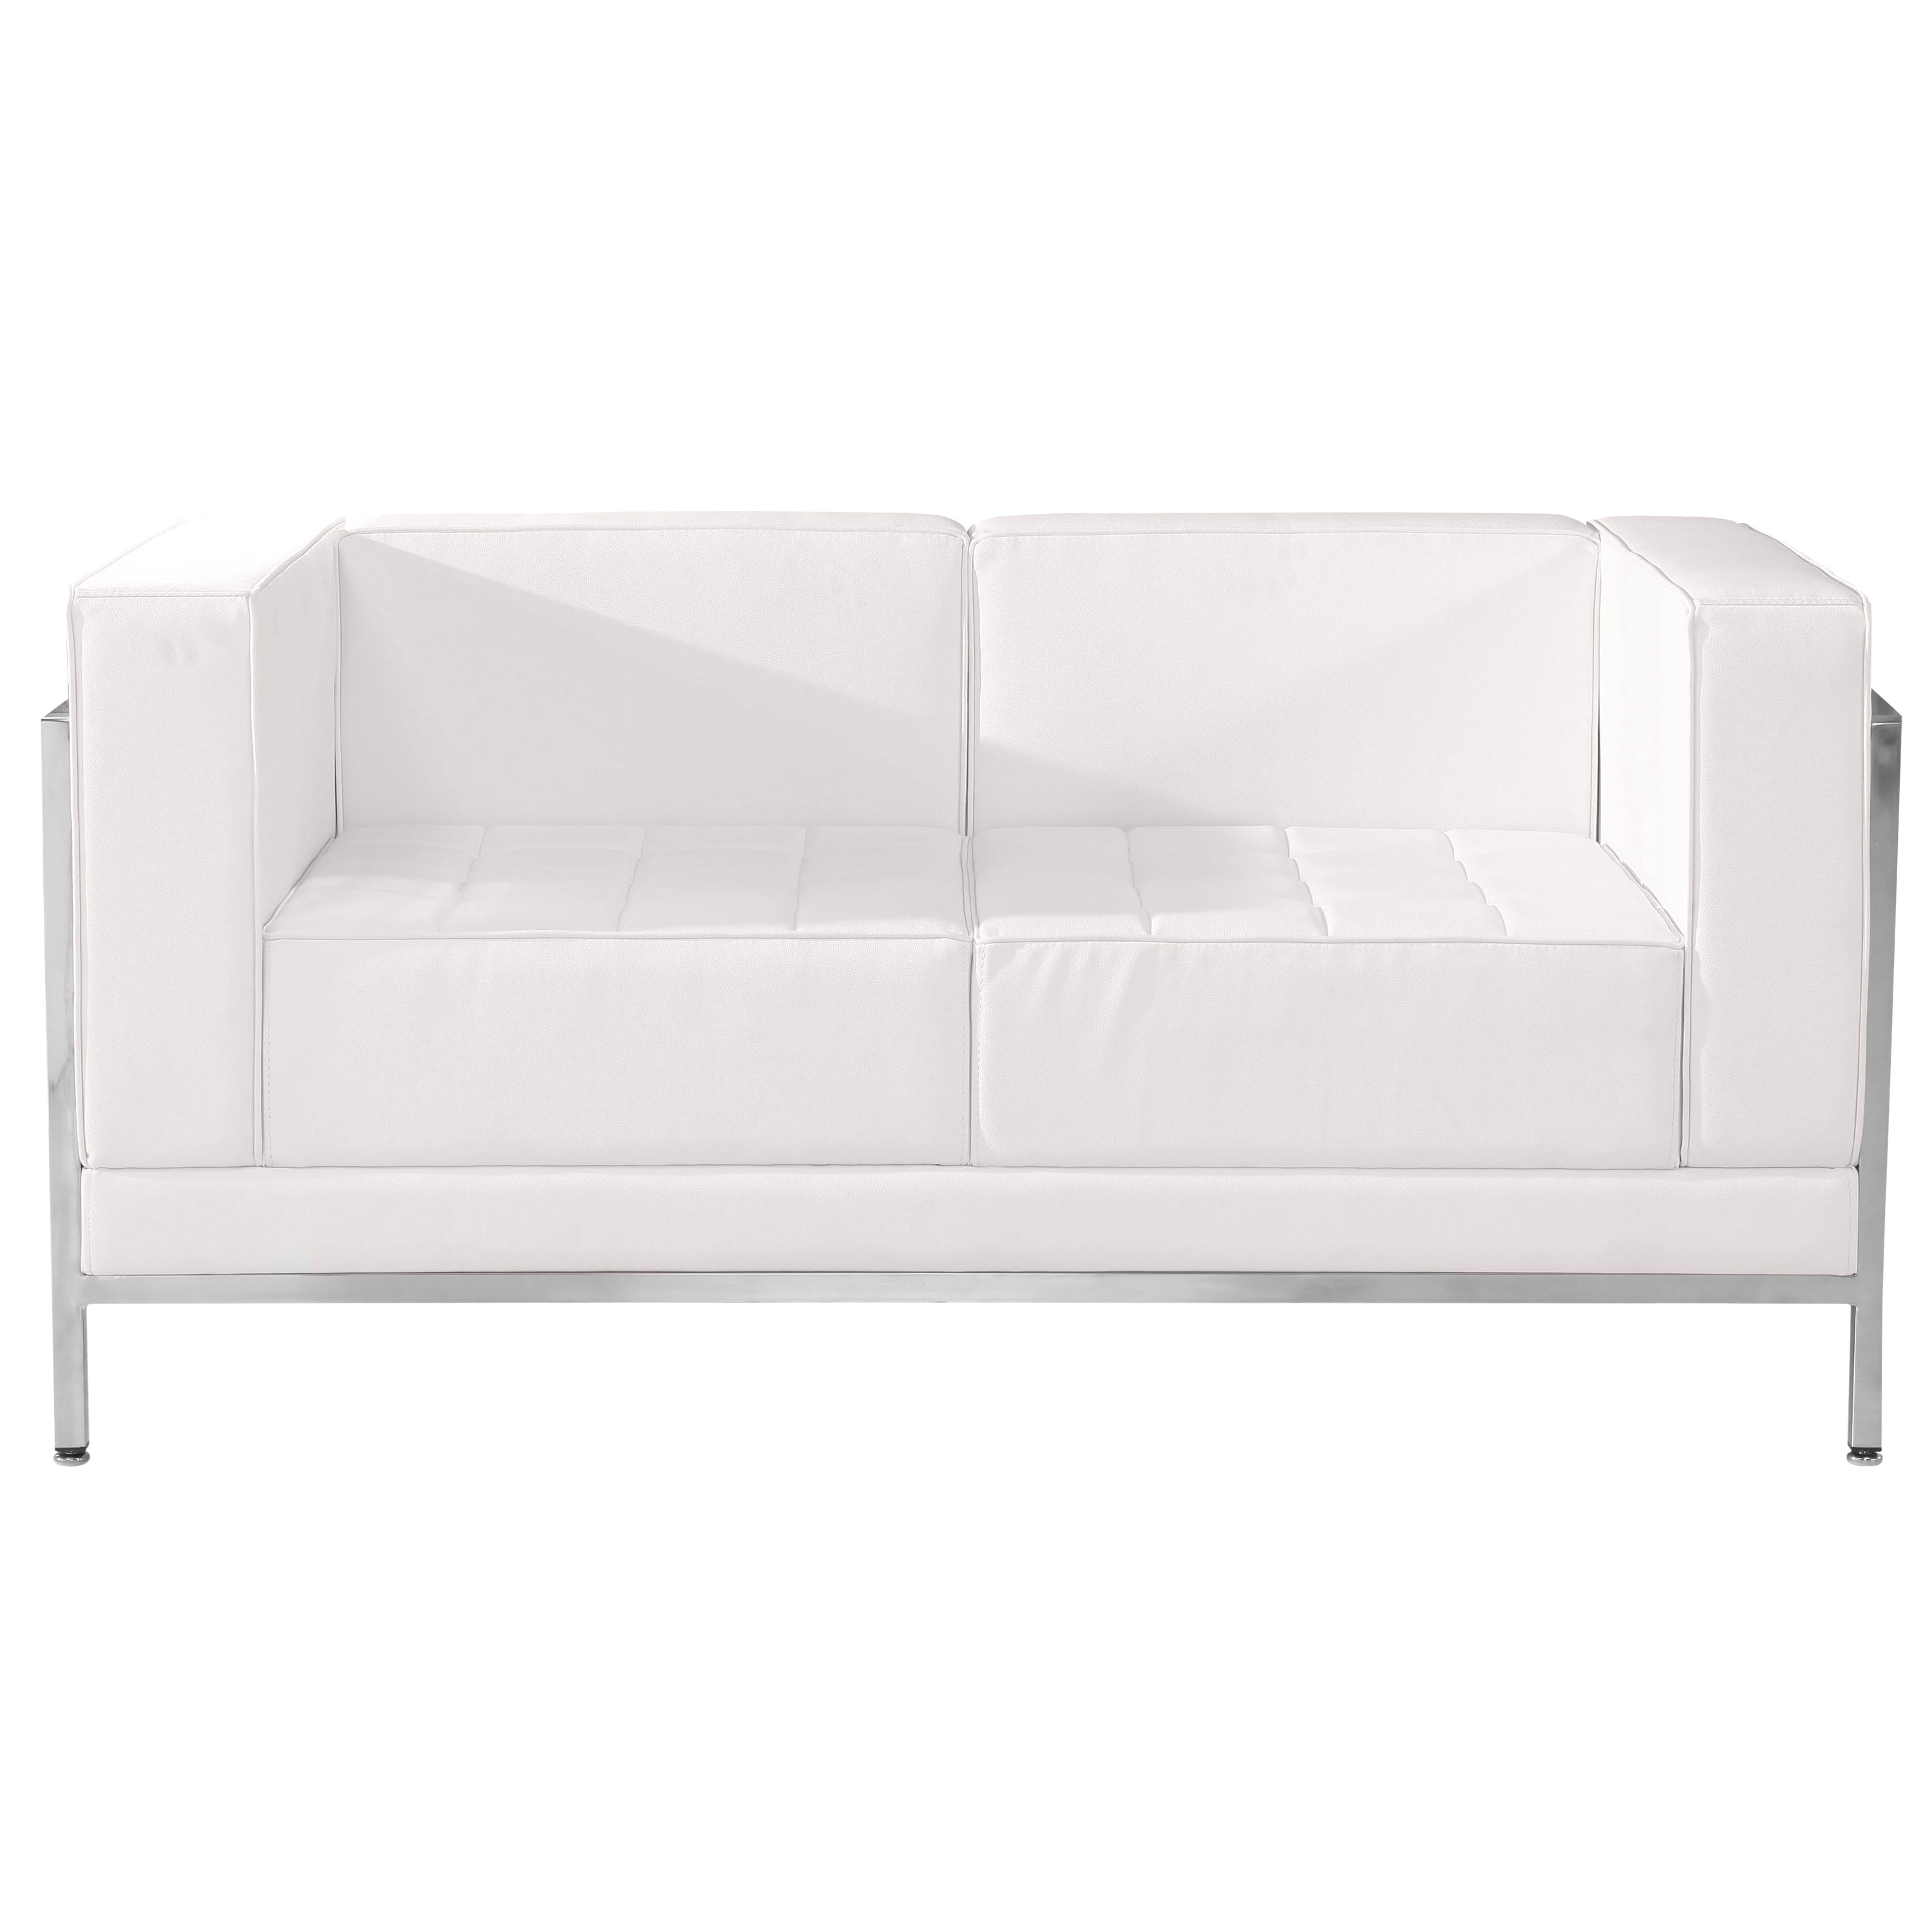 HERCULES Imagination Series Contemporary LeatherSoft Modular Loveseat with Quilted Tufted Seat and Encasing Frame-Modular Reception Loveseat-Flash Furniture-Wall2Wall Furnishings